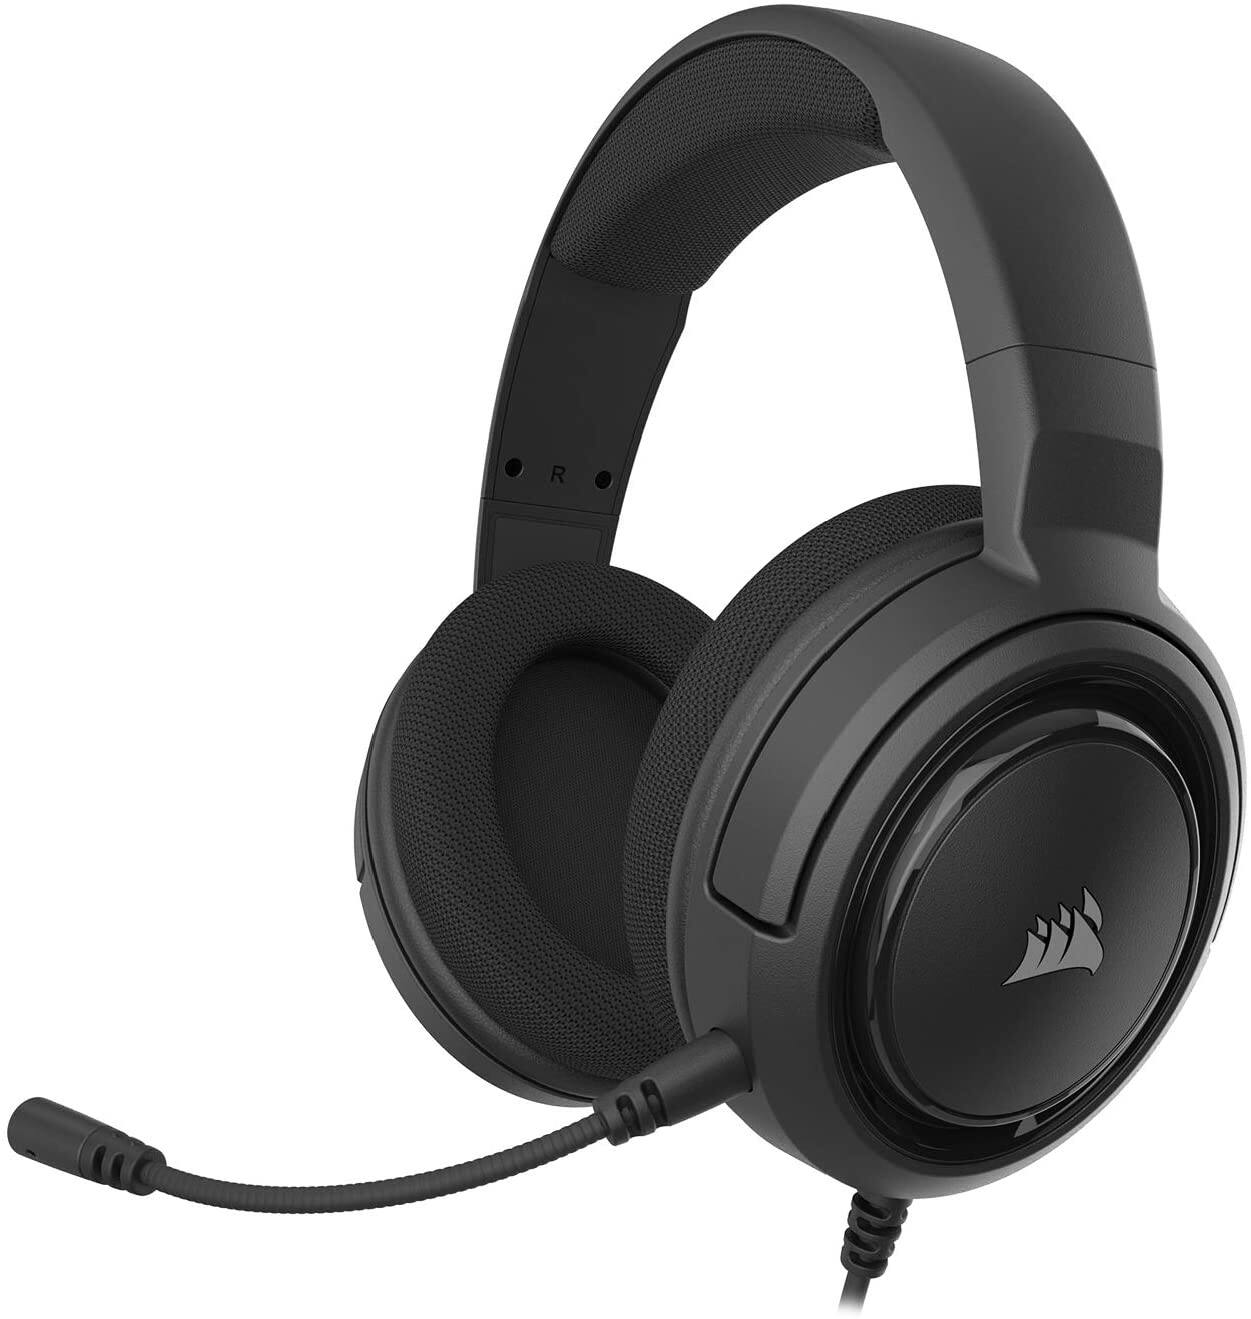 CORSAIR HS45 SURROUND Wired Stereo Gaming Headset (Carbon) - $34.99 + FS